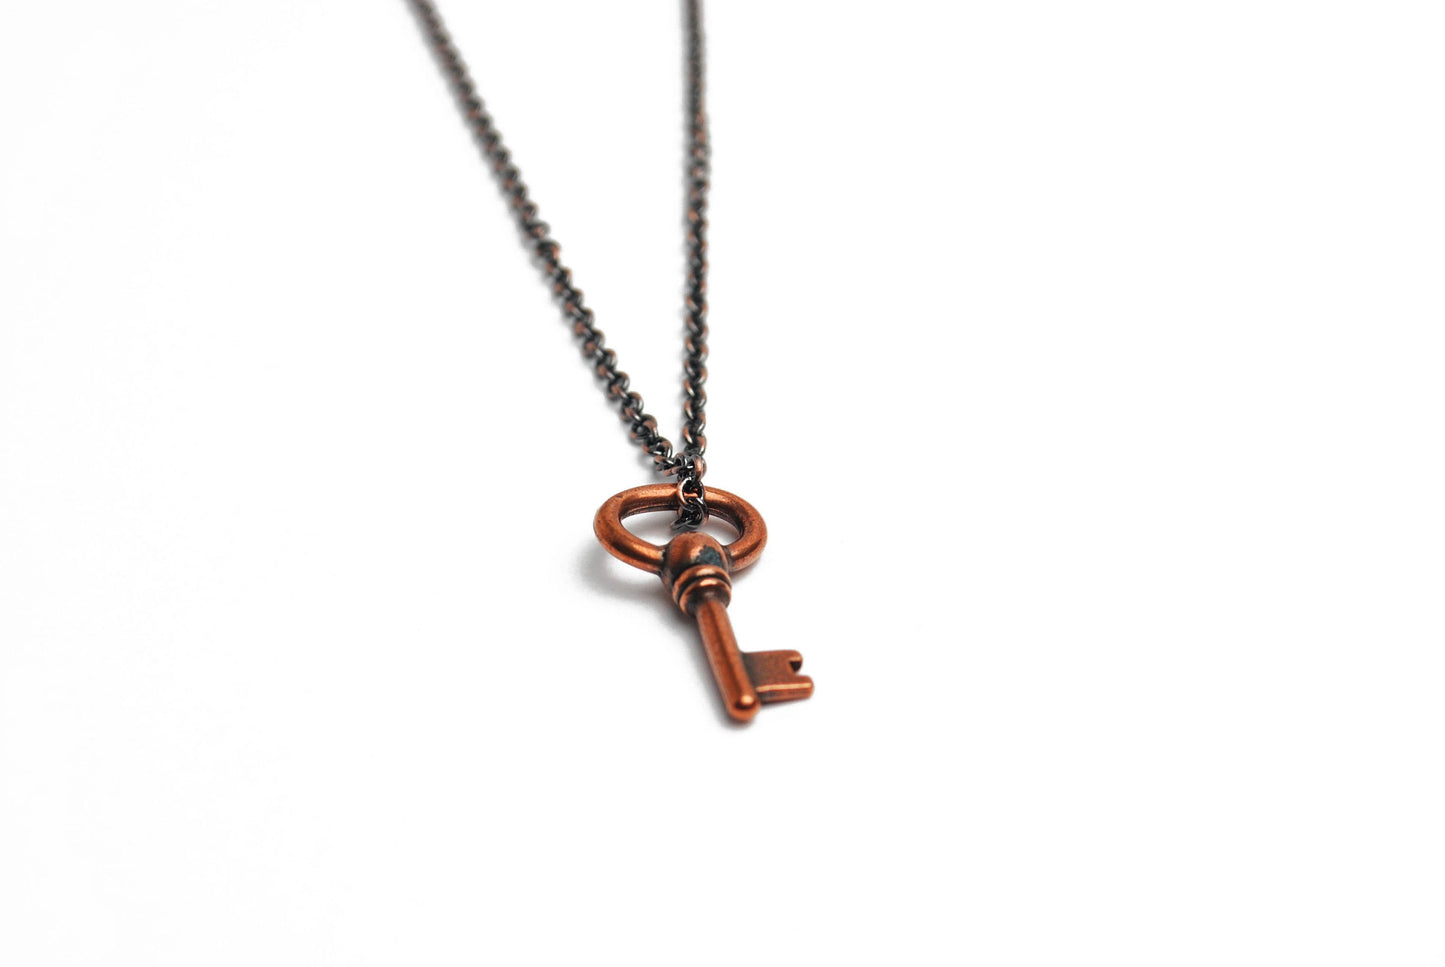 Oval Key Necklace in Antique Copper